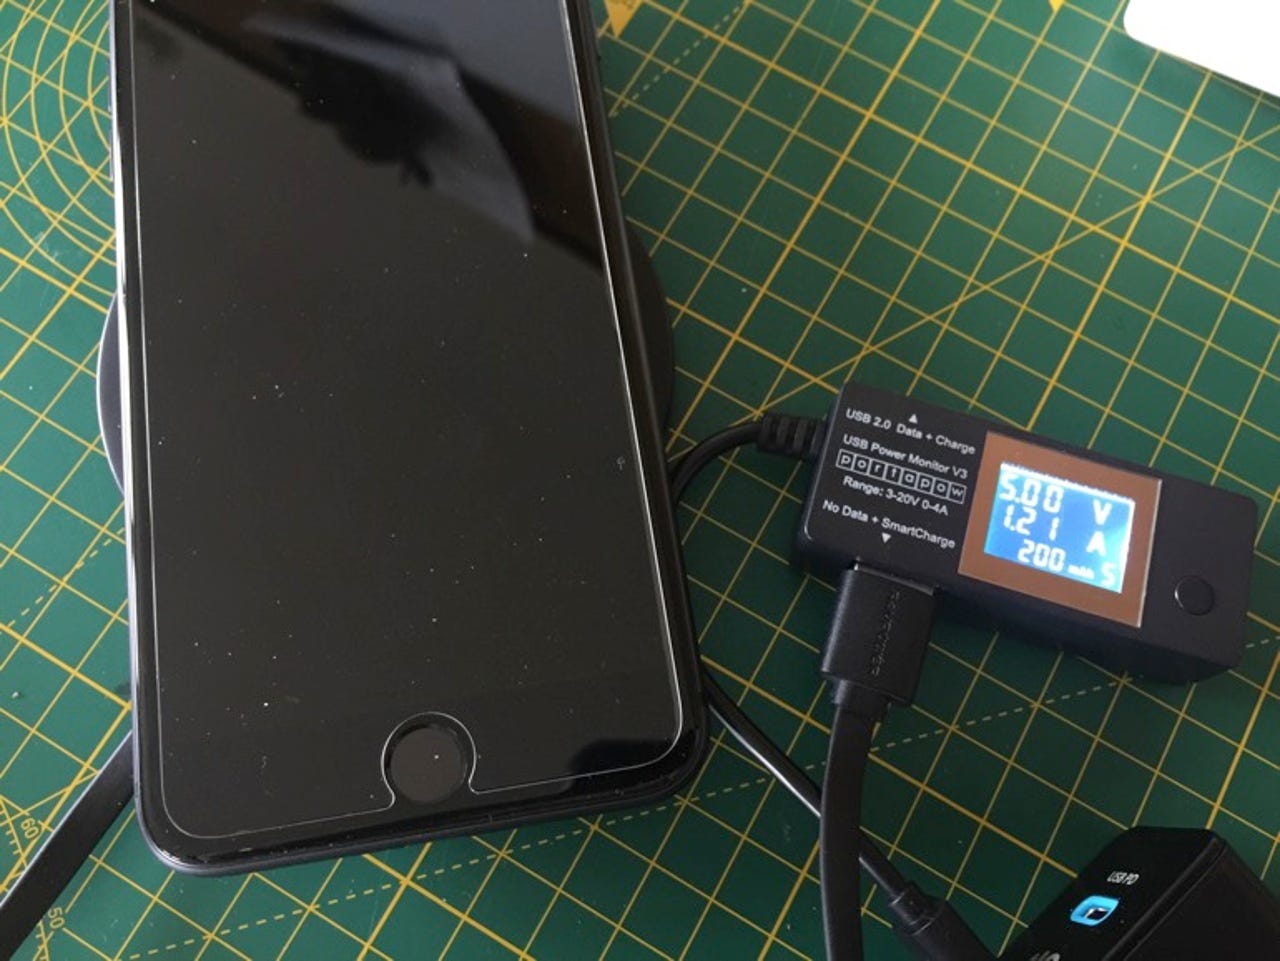 Wireless charging using RAVPower 15W charging pad (without case)